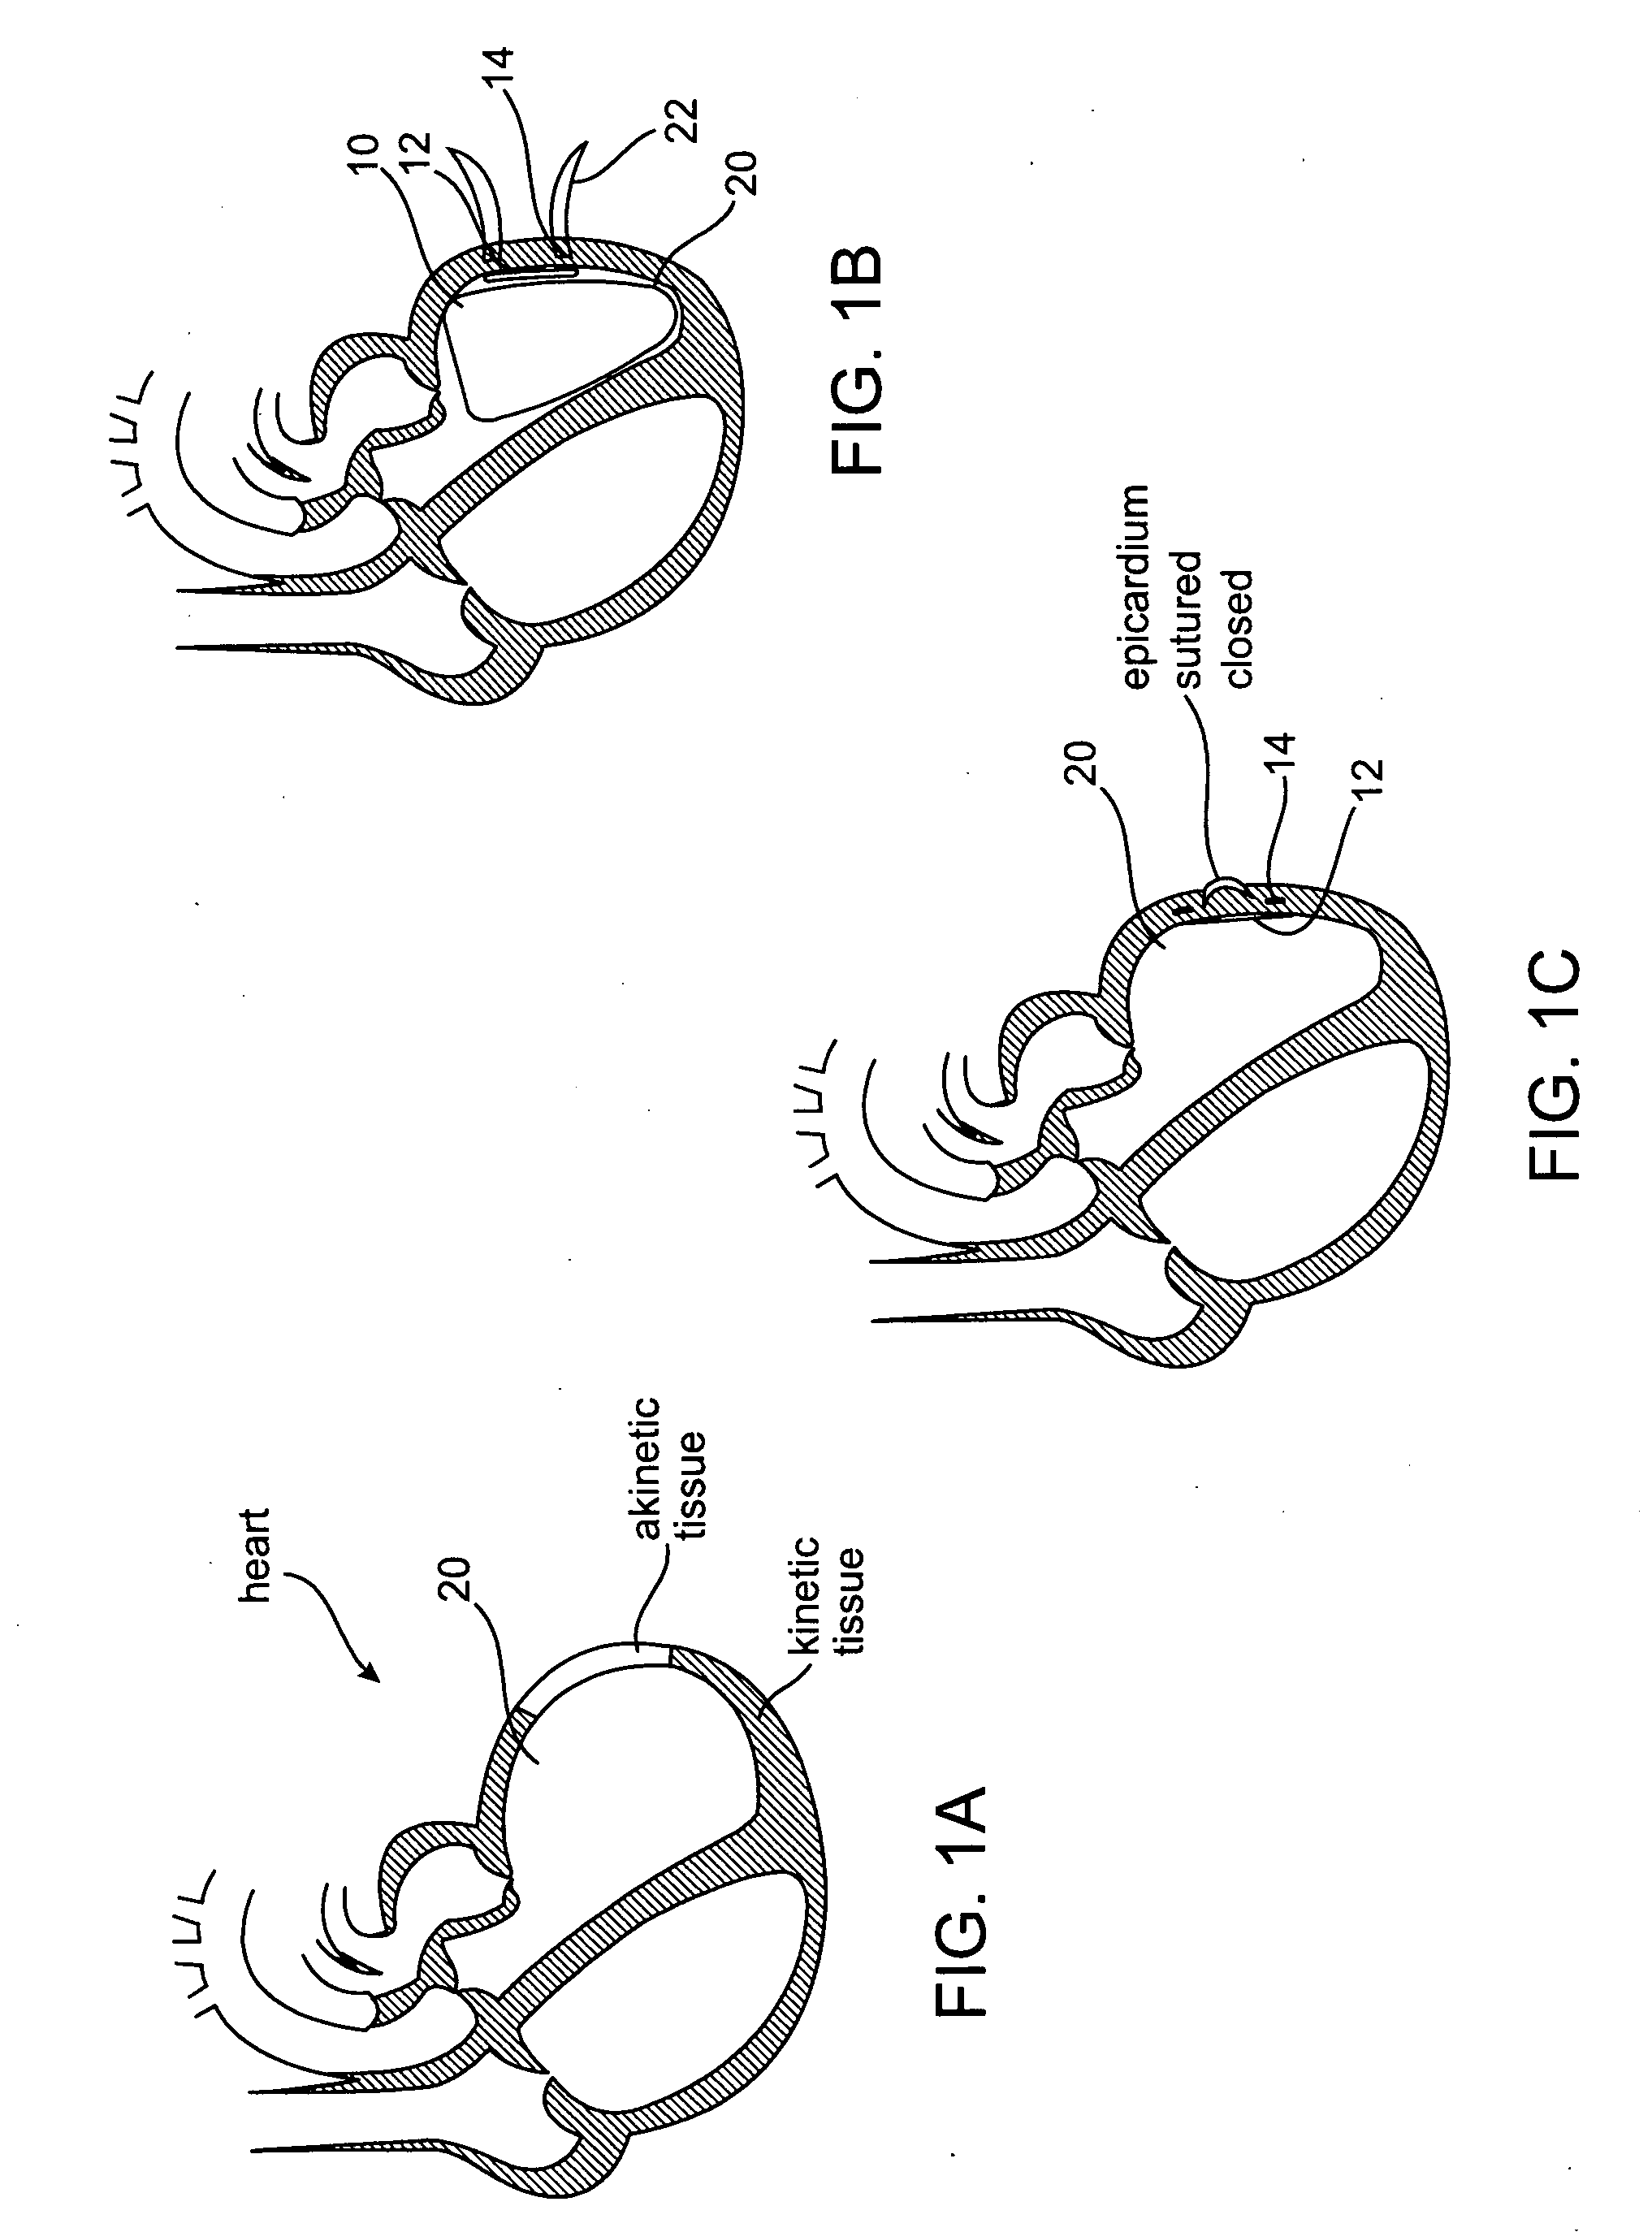 Sizing and shaping device for treating congestive heart failure